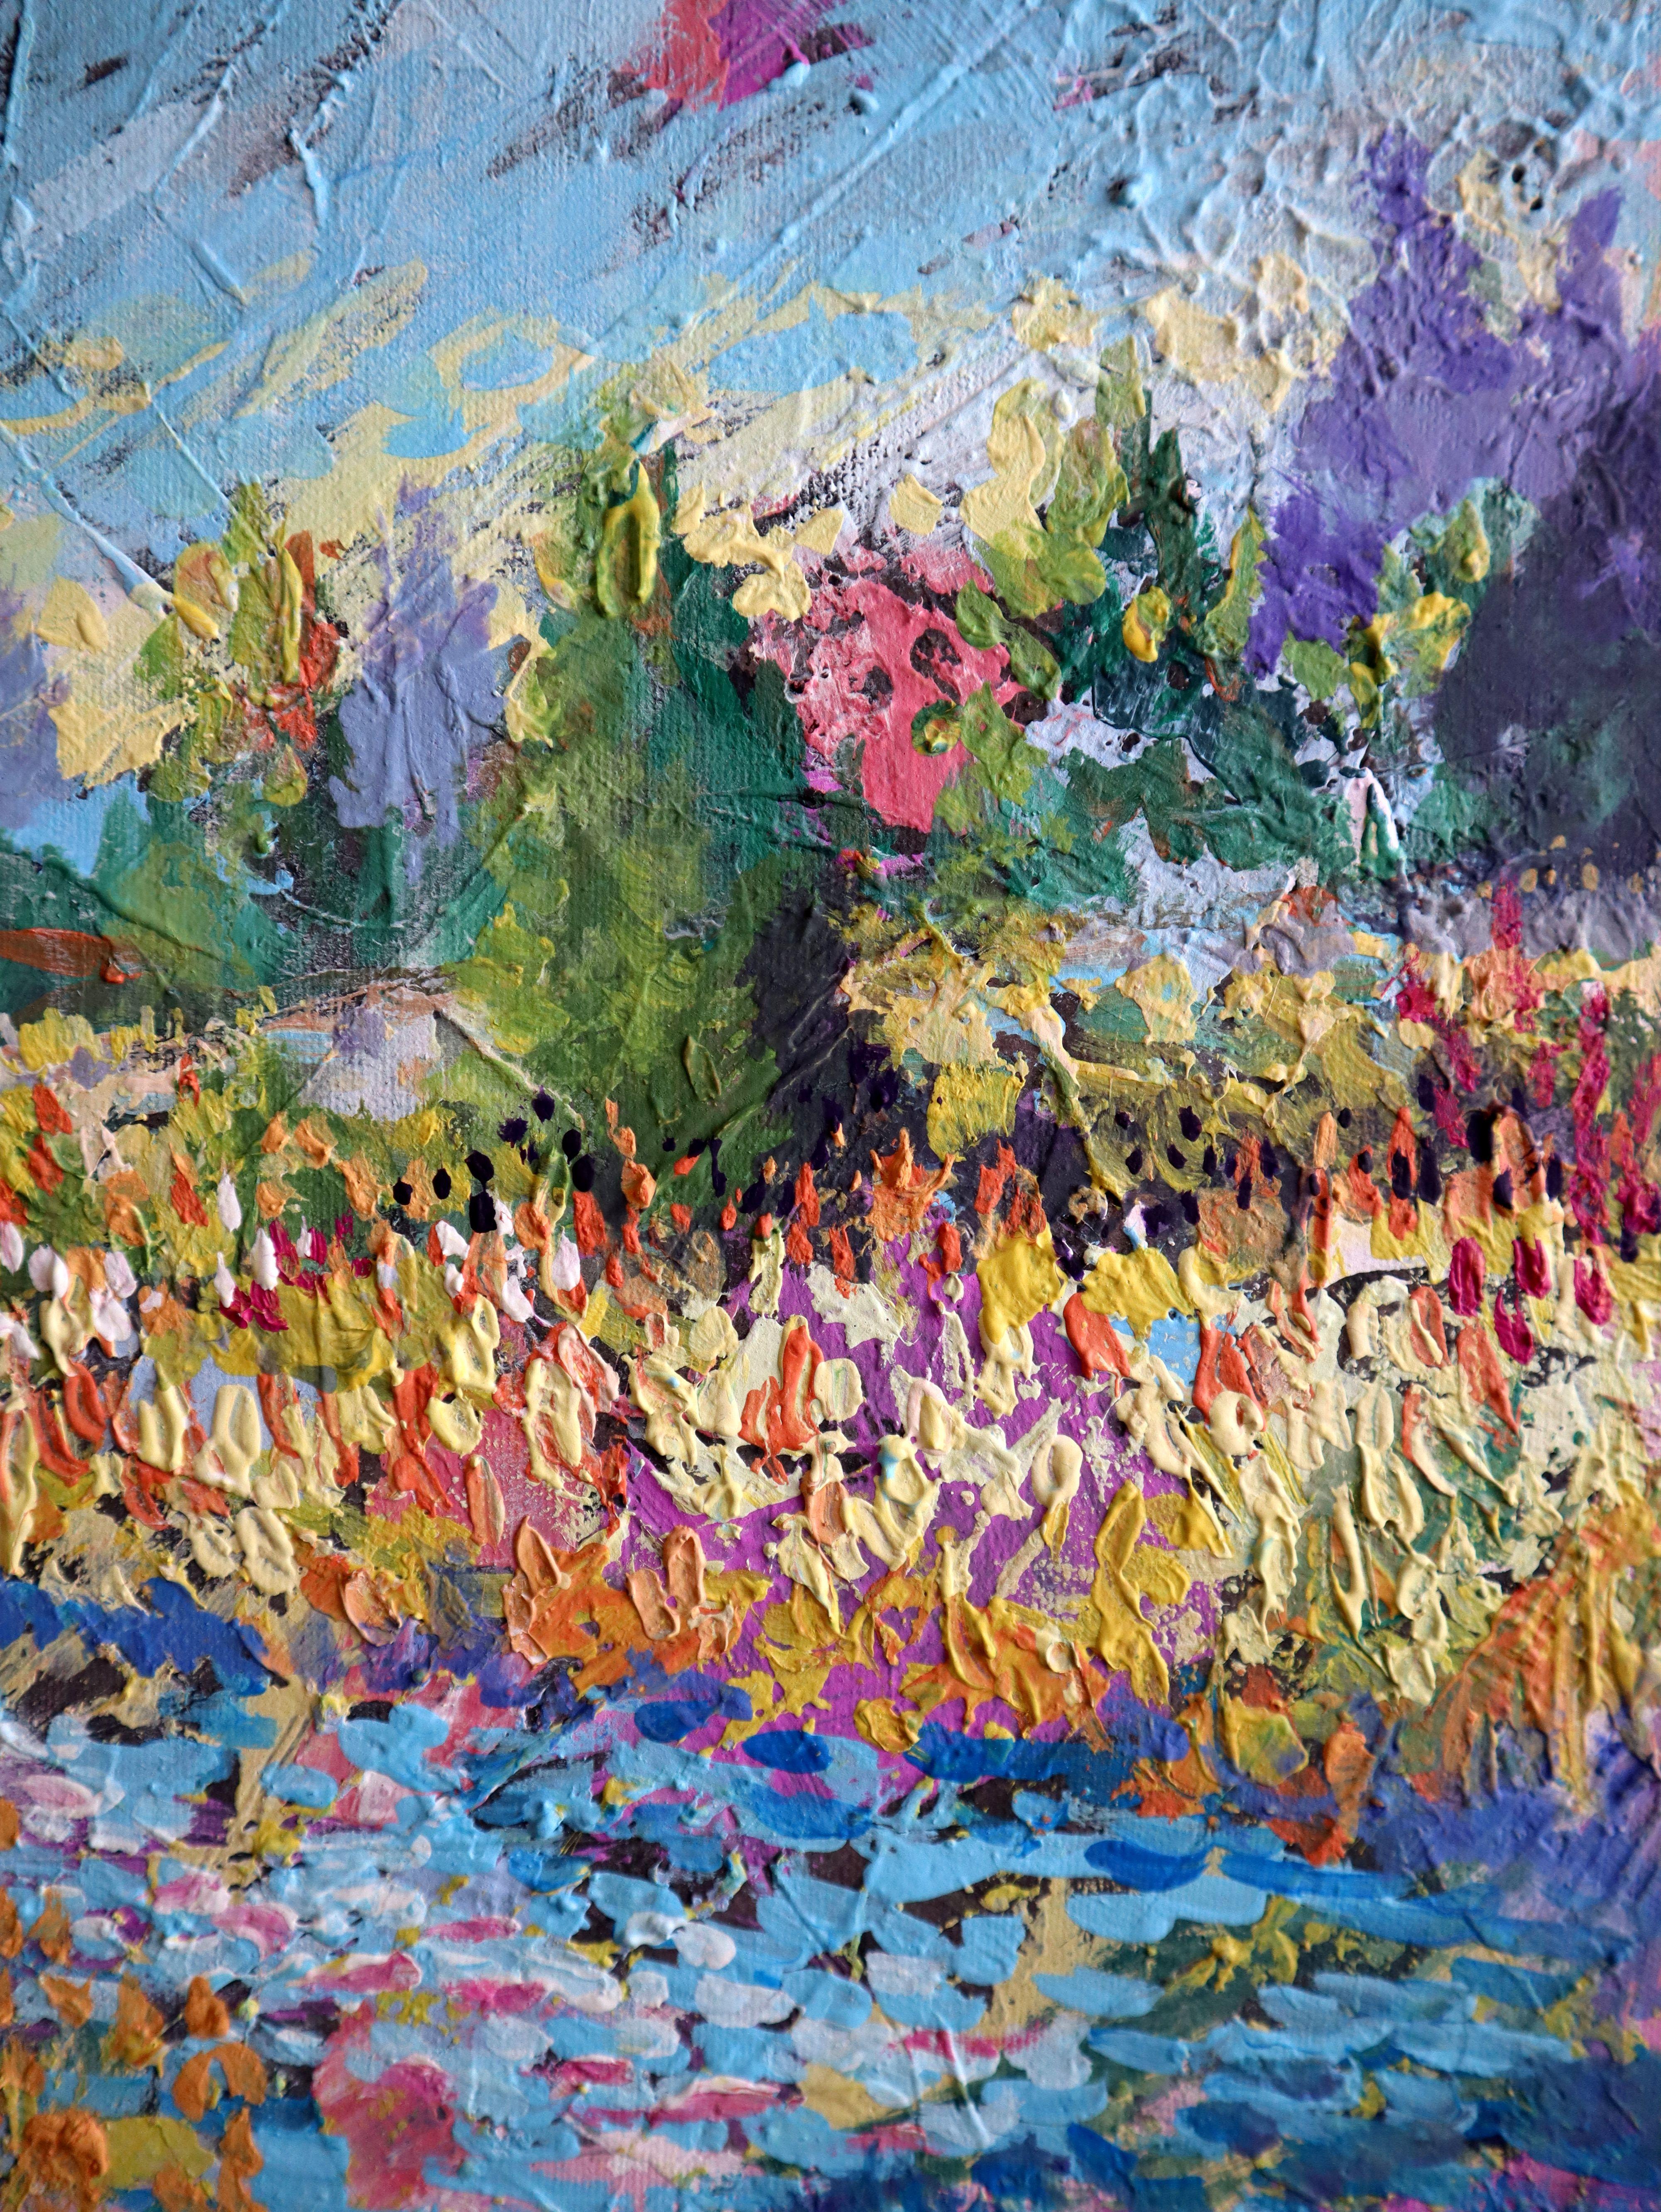 In creating this vibrant tableau, I wielded acrylic and oil with fervent, sweeping gestures, each stroke imbued with passion. I embraced expressionism and impressionism to weave a tapestry of emotions, blending the wild dance of colors to evoke a